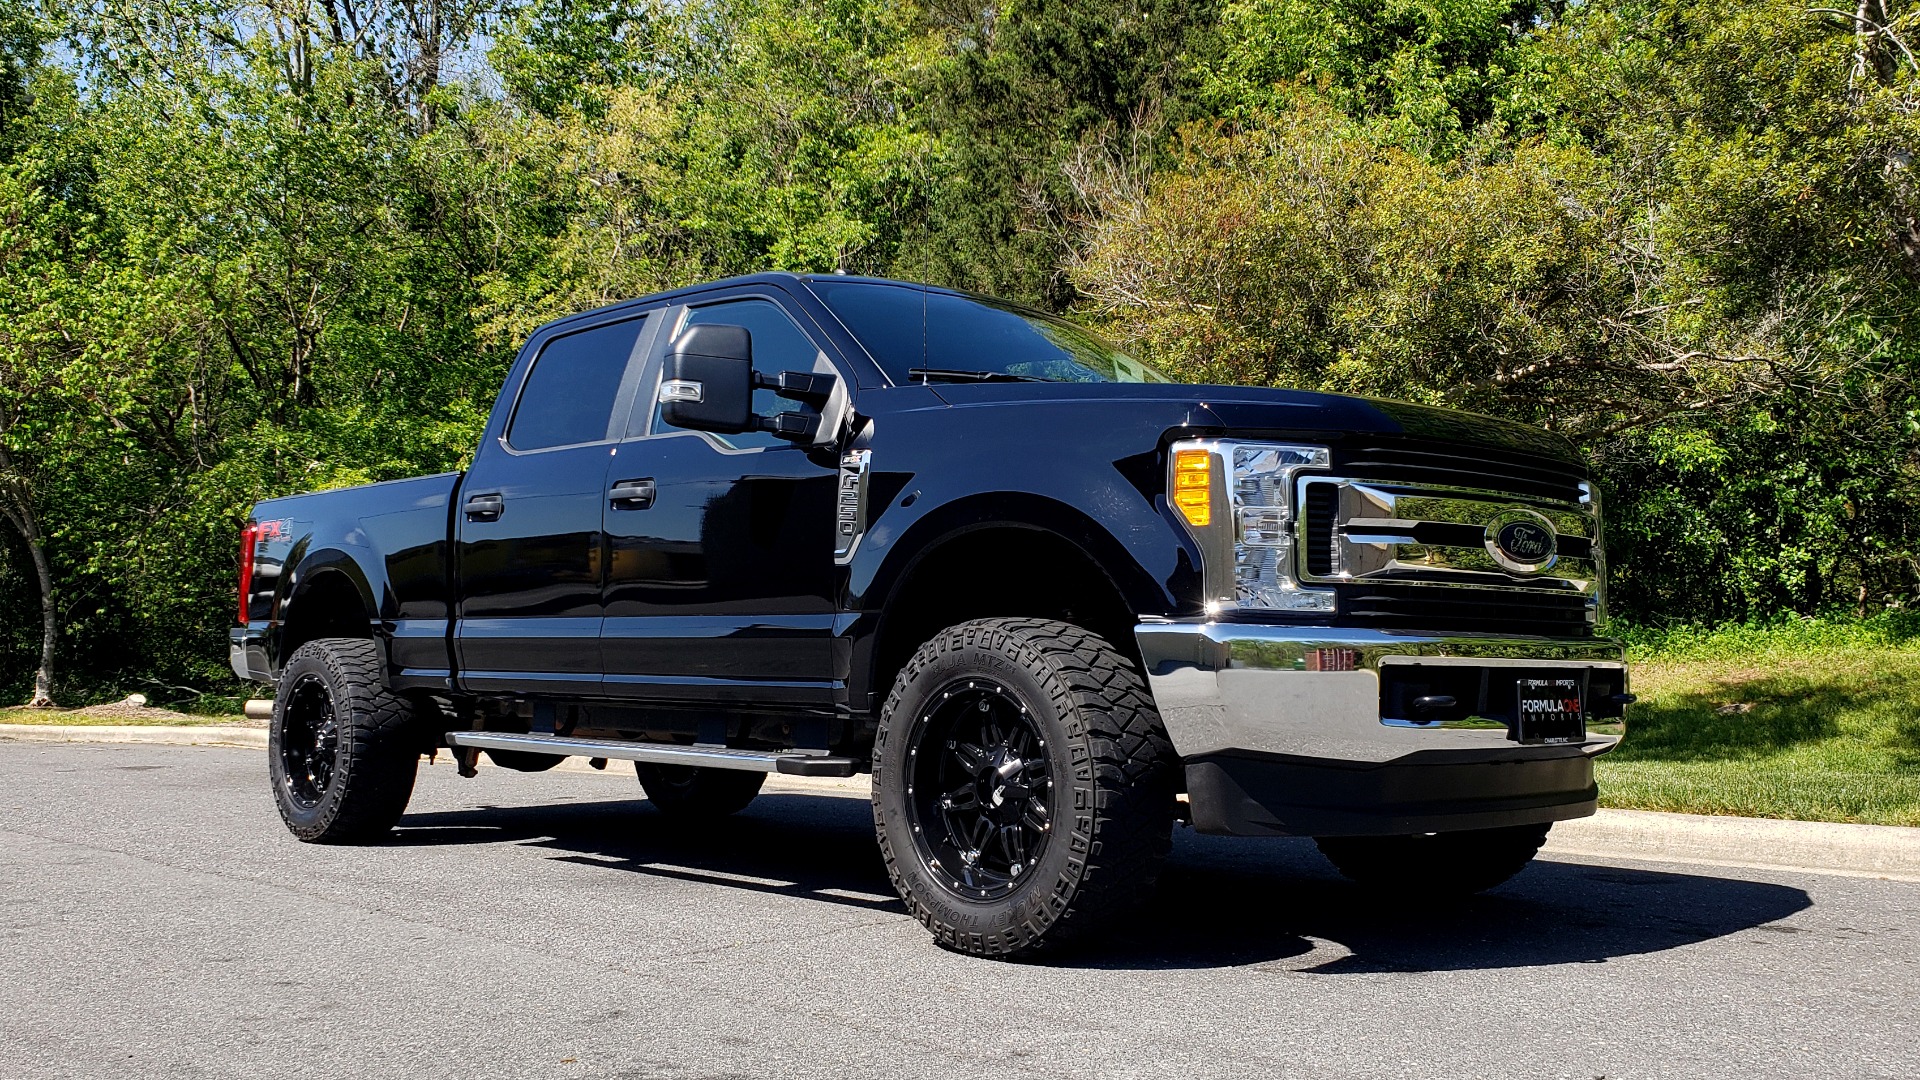 Used 2017 Ford SUPERDUTY F-250 SRW XL 4X4 / 160 WB / 6.2L EFI V8 / 6-SPD AUTO / 6'8 BED for sale Sold at Formula Imports in Charlotte NC 28227 4